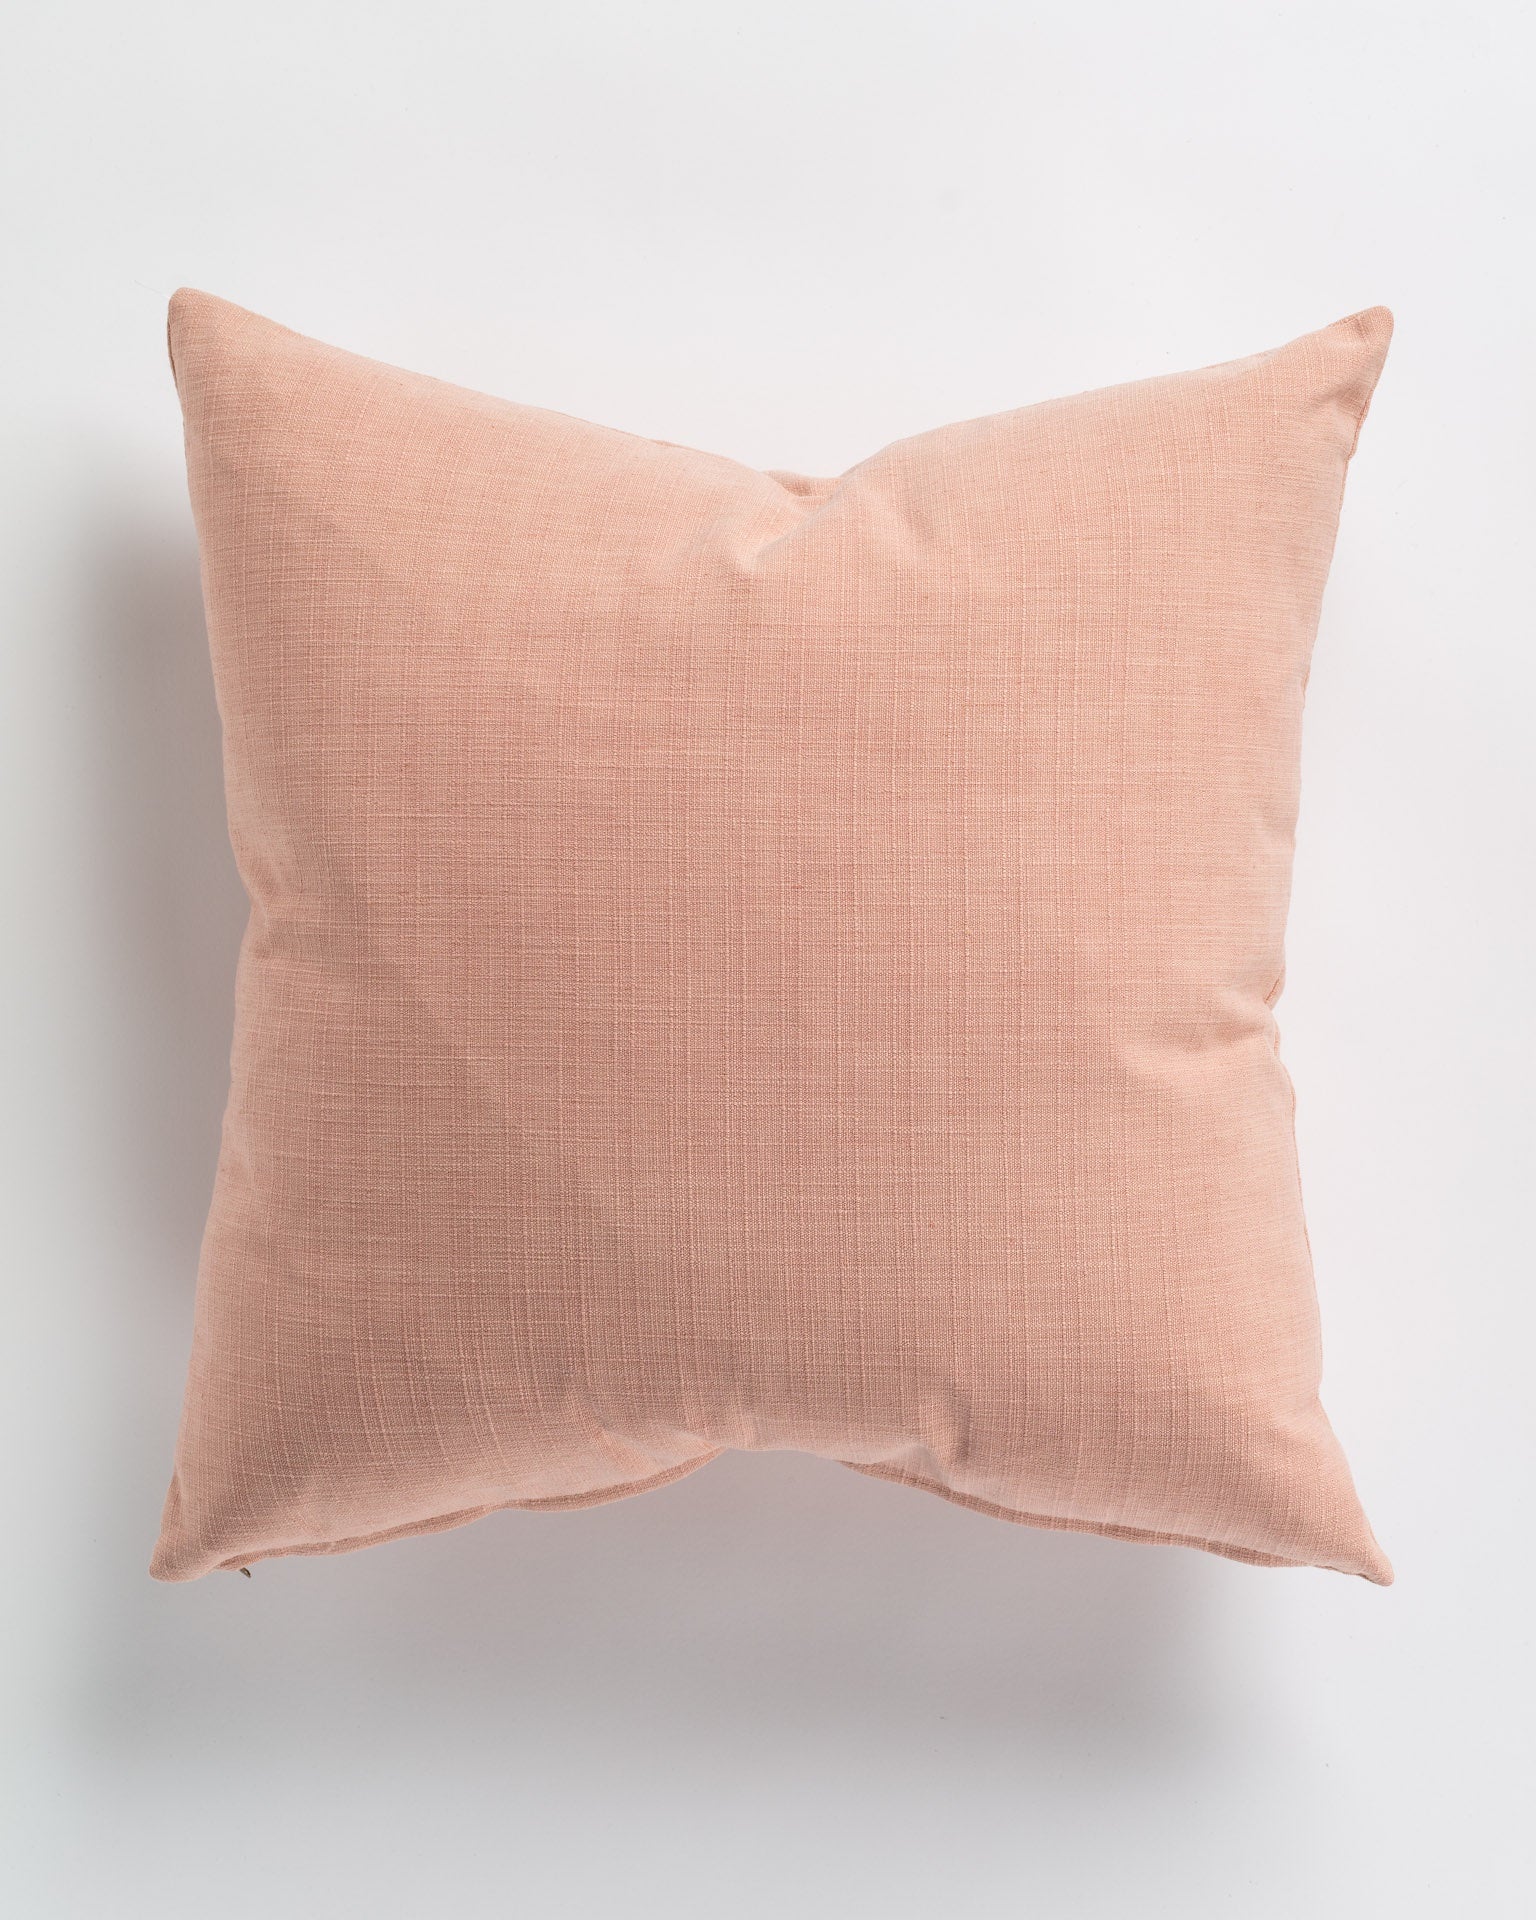 A square cushion with a soft, peach-colored fabric cover. The fabric appears to have a subtle woven texture, and the Gabby Splendor Nude Pillow 26x26 is placed on a plain white background. The corners of the pillow are slightly creased, giving it a relaxed look.